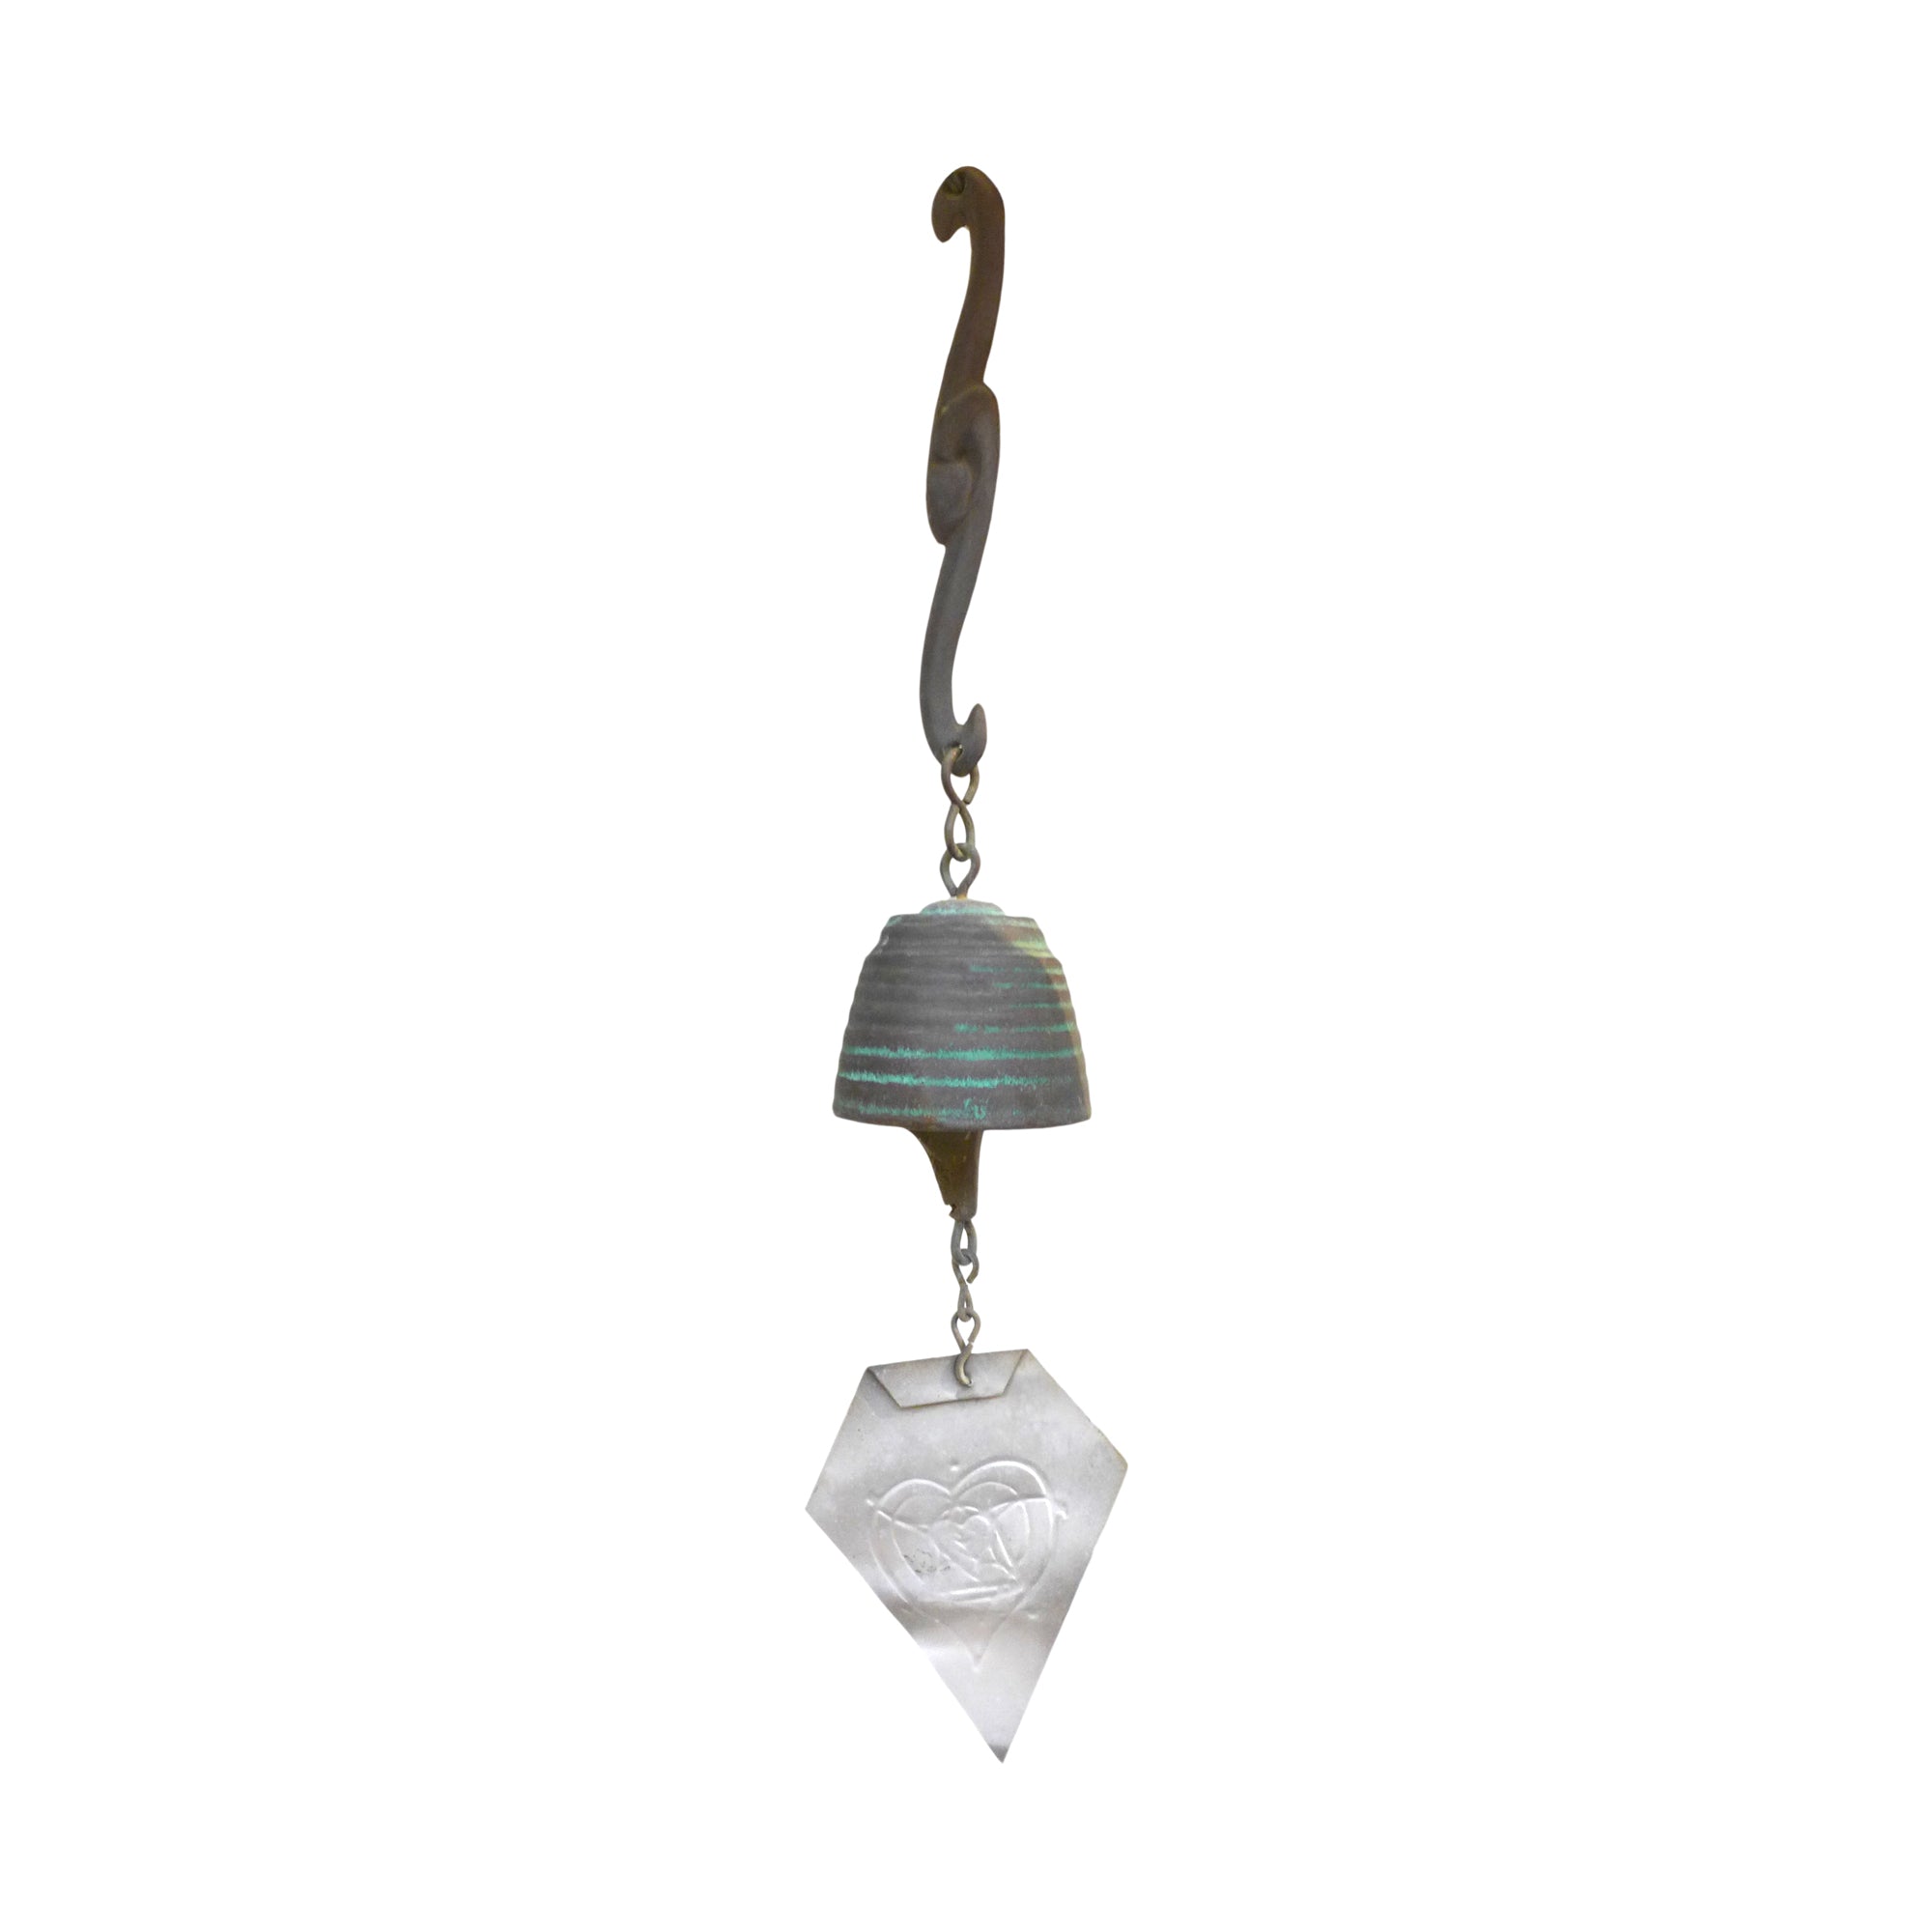 Modernist Cast Bronze Hanging Windbell by Harmony Hollow